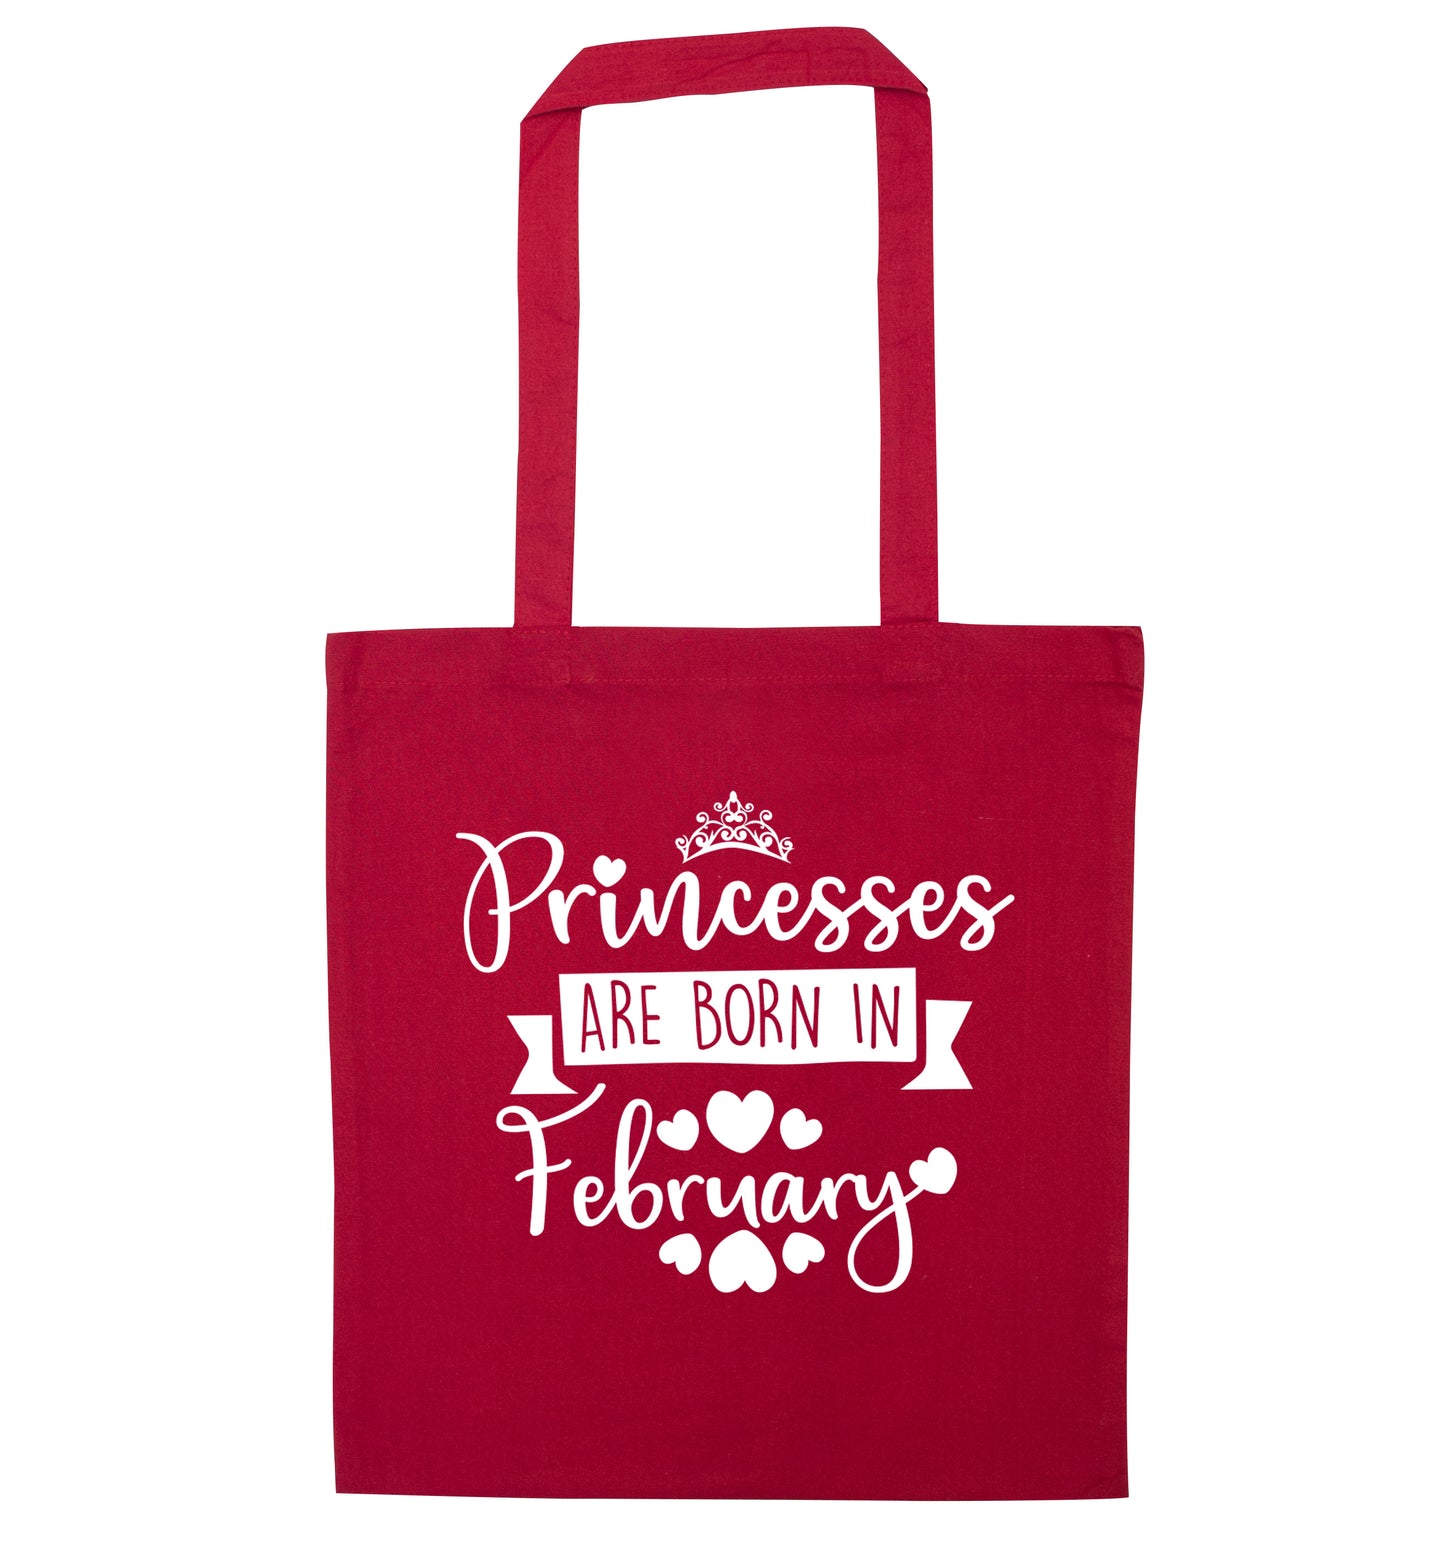 Princesses are born in February red tote bag